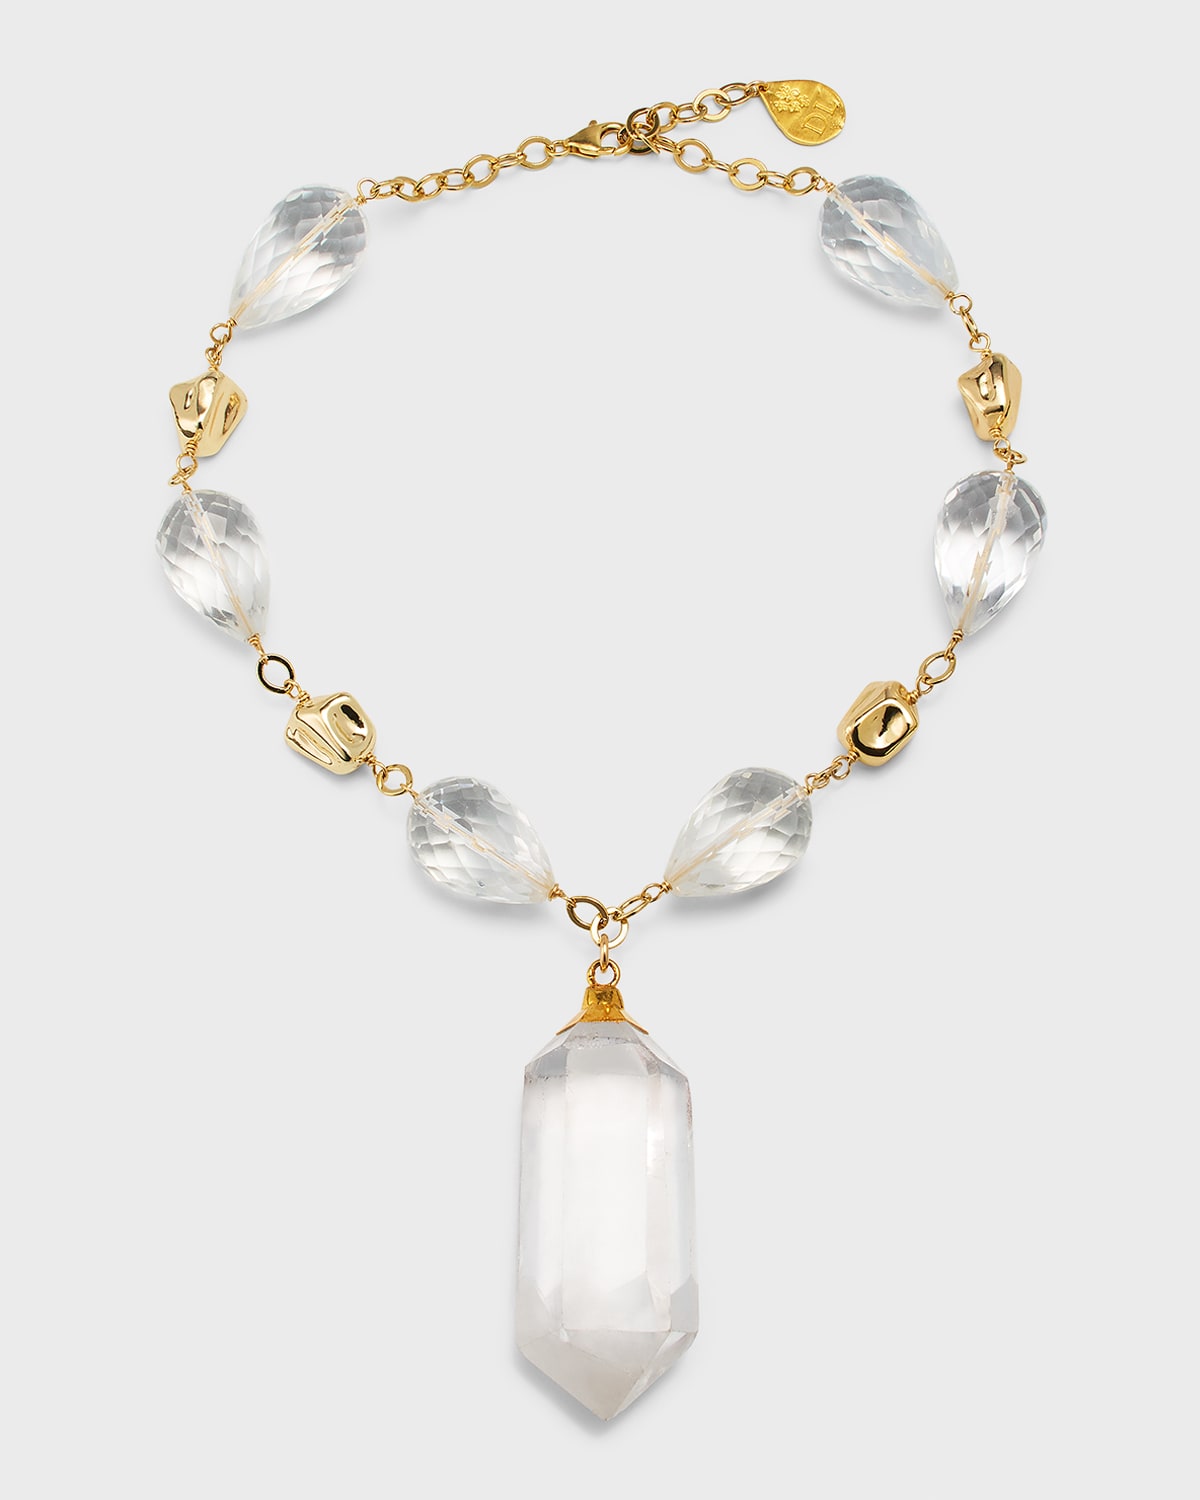 Devon Leigh 24k Gold Foil And Crystal Nugget Necklace